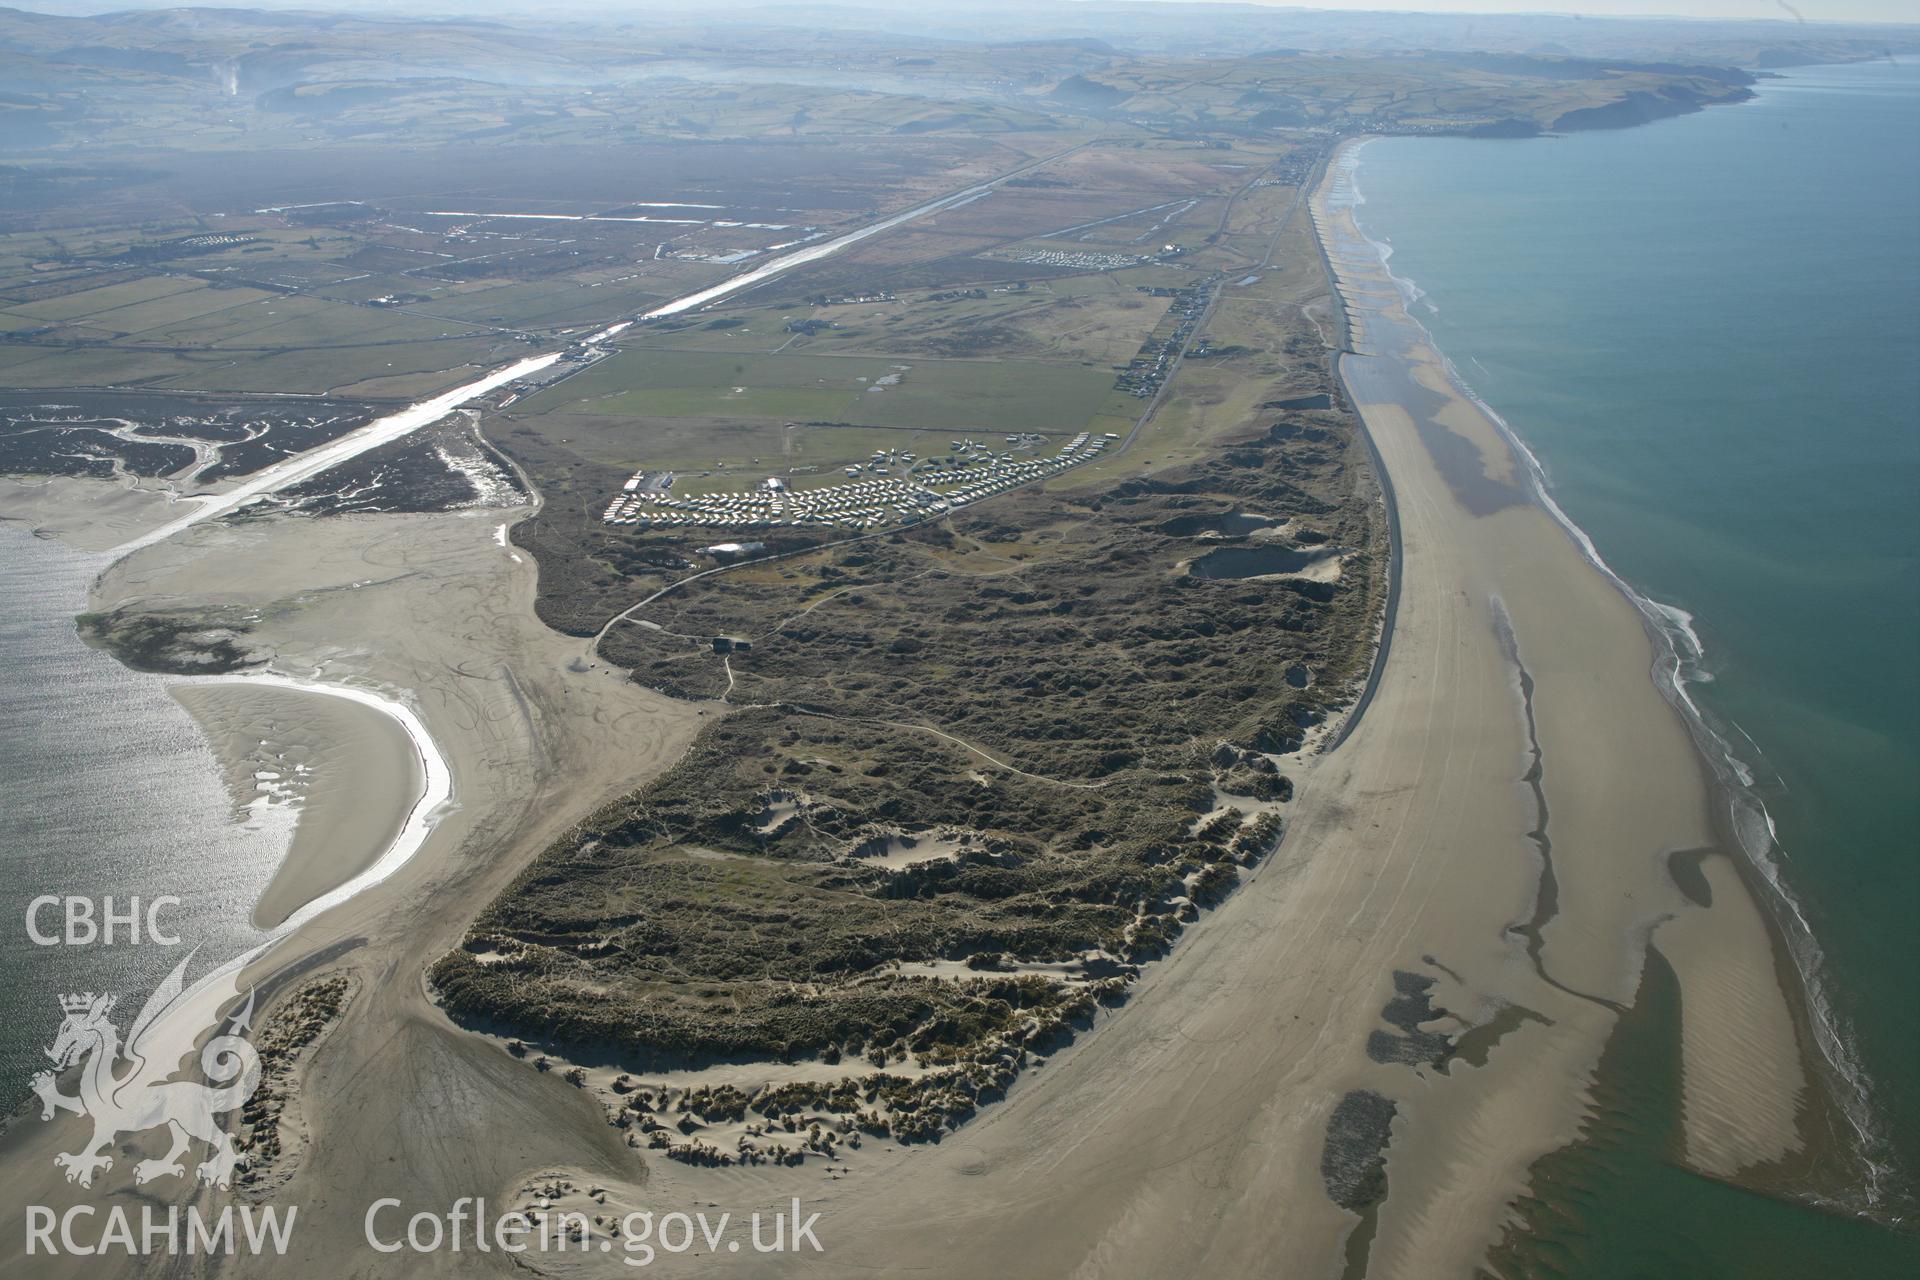 RCAHMW colour oblique photograph of Ynyslas nature reserve. Taken by Toby Driver on 08/03/2010.